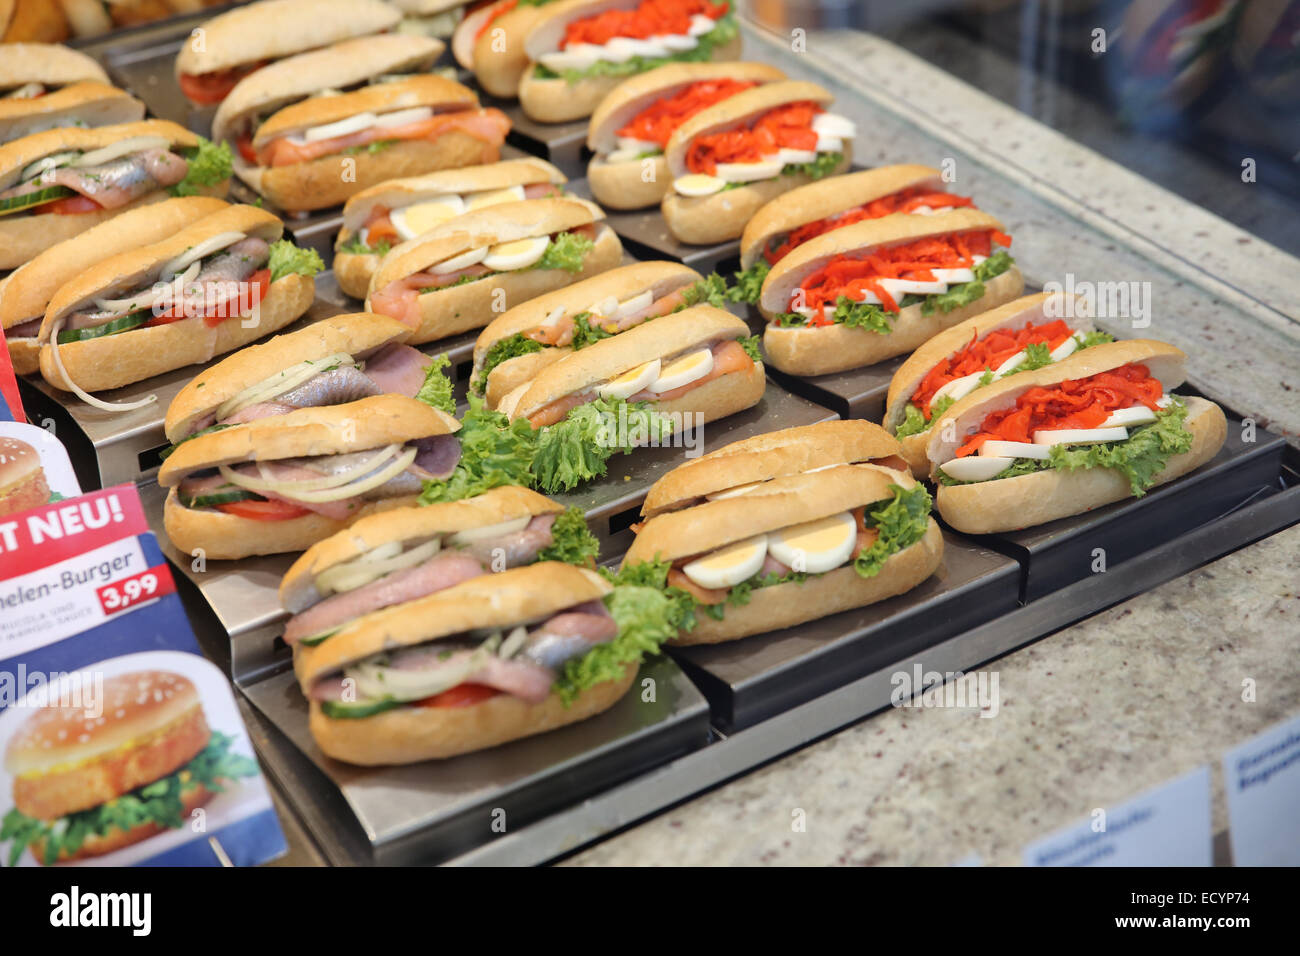 Nordsee sandwich Stock Photo